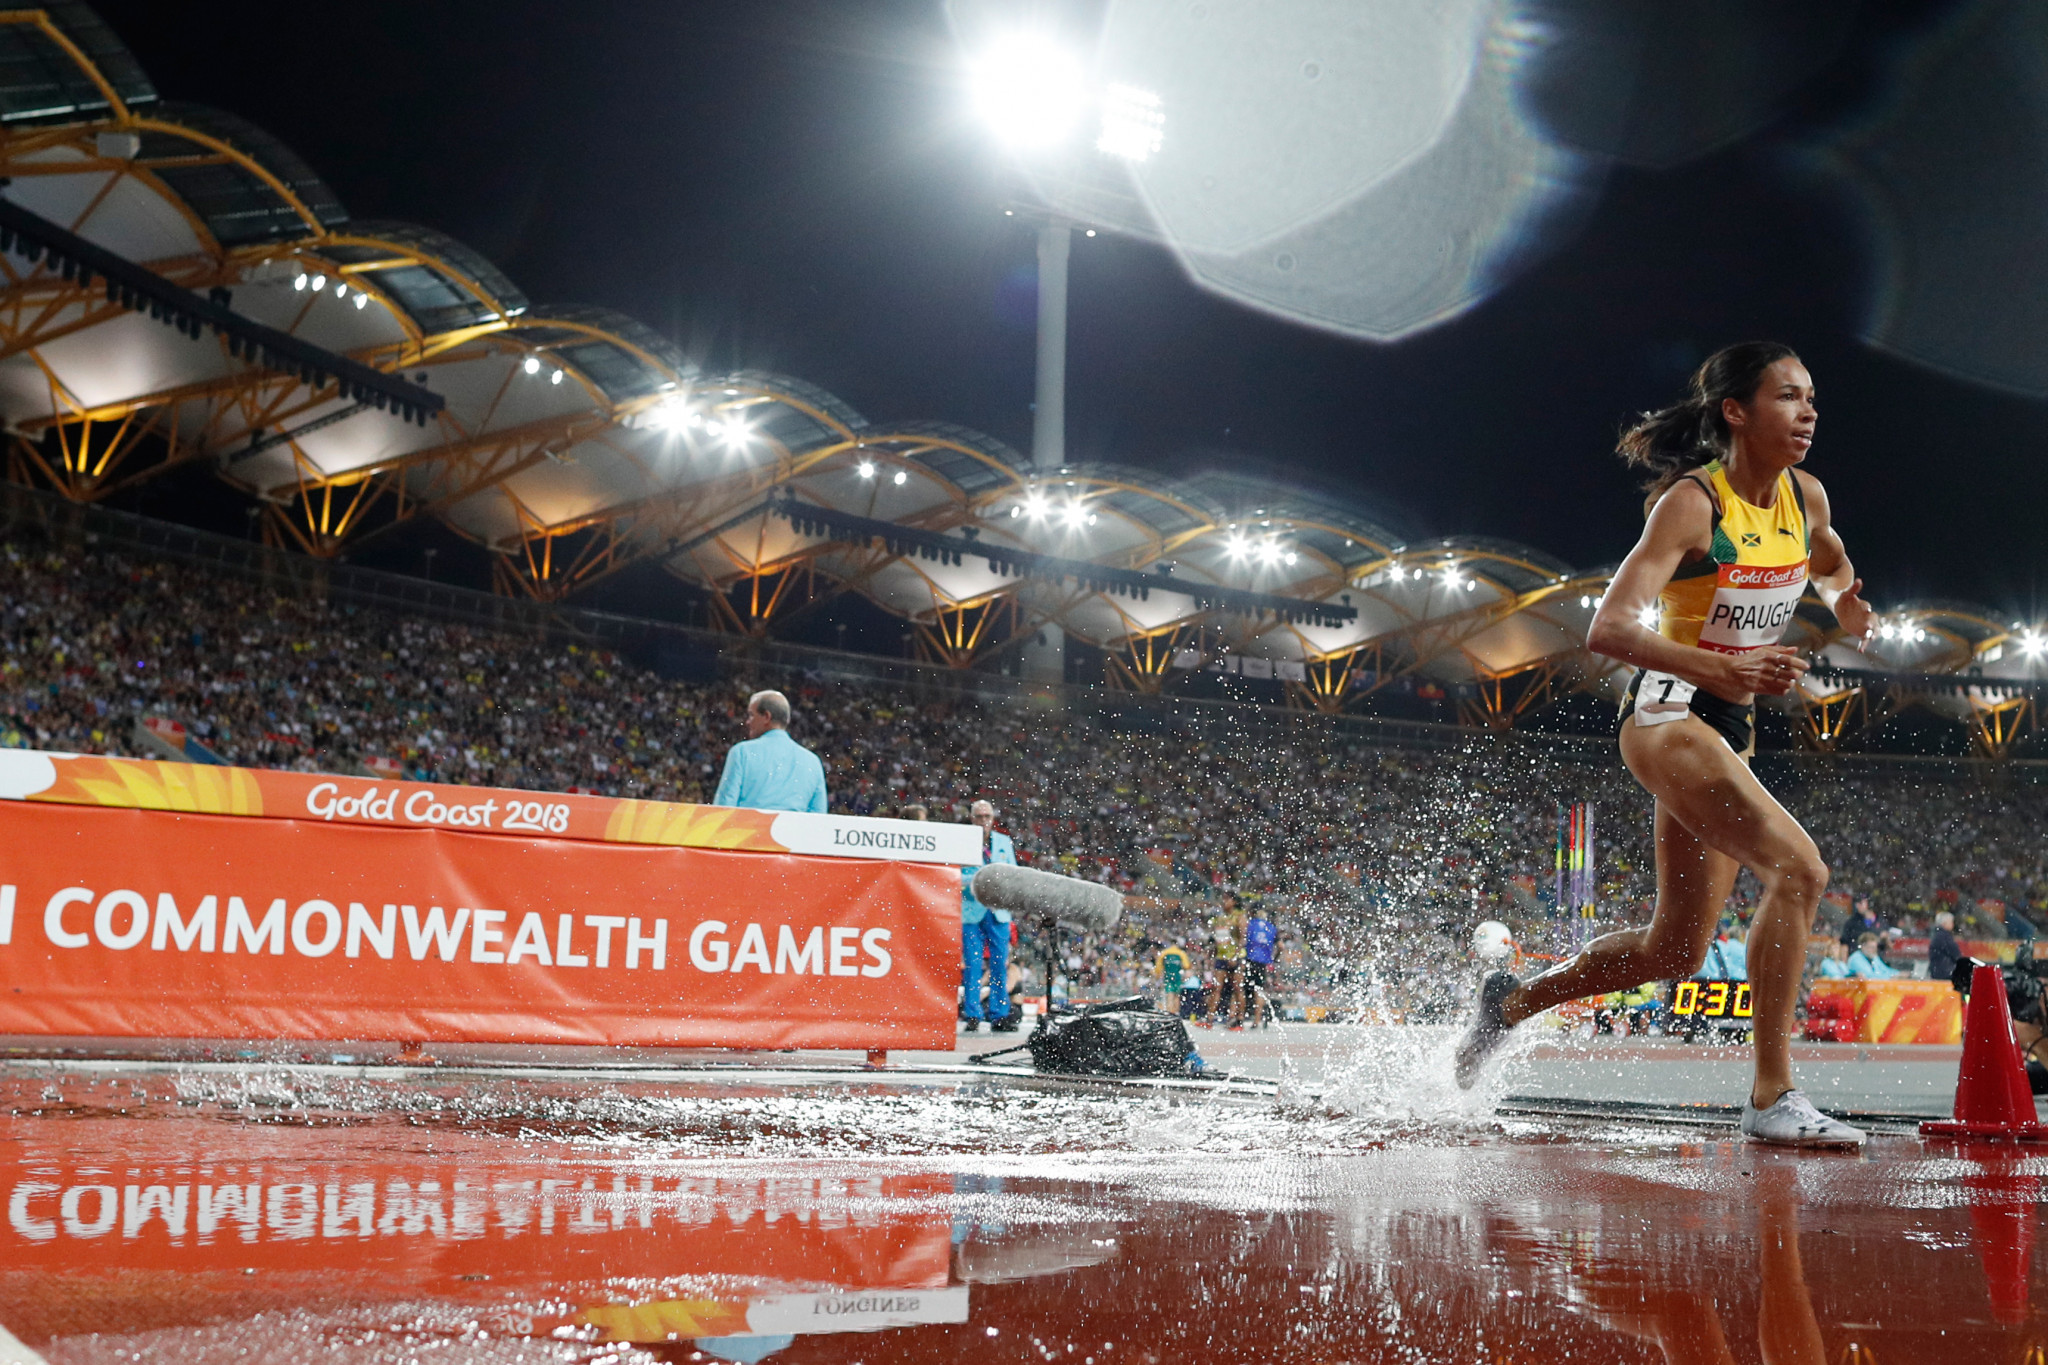 Jamaica's Aisha Praught ended Kenya's domination of the women's 3,000m steeplechase event ©Getty Images